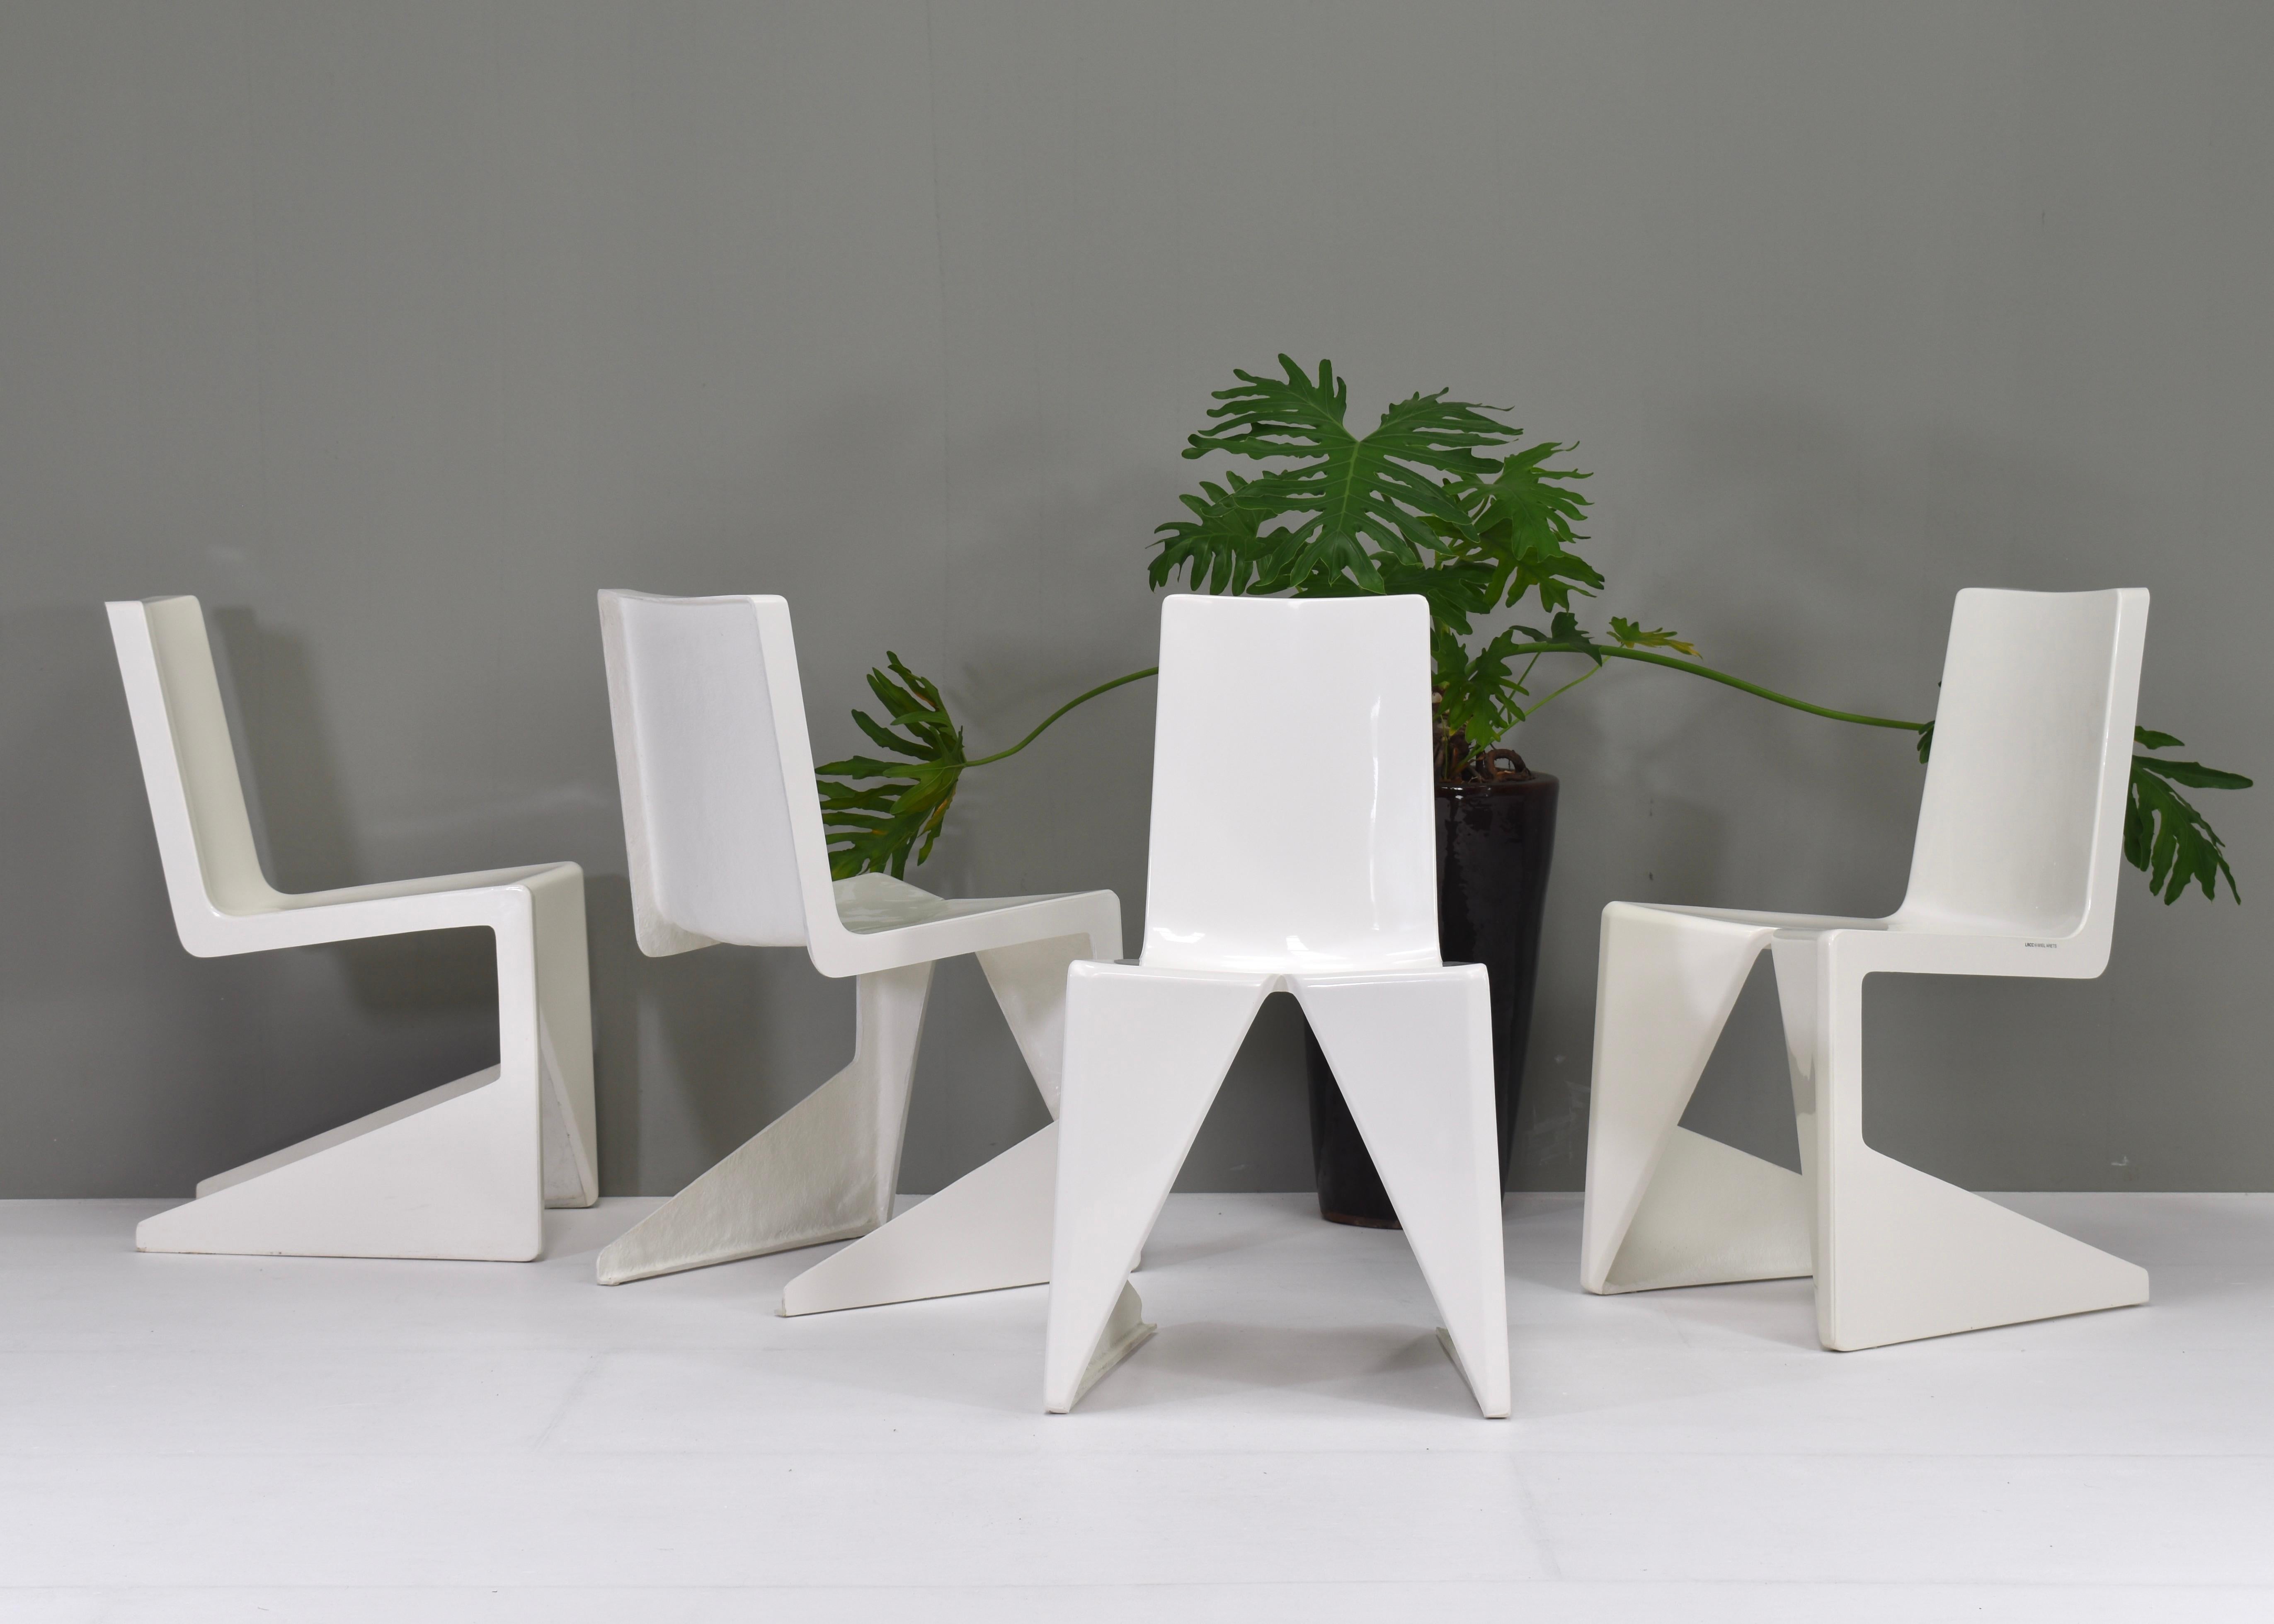 Sculptural modernistic dining chairs designed by architect Wiel Arets and manufactured by Lensvelt. The chairs were designed for the Leidsche Rijn College (LRC) in Utrecht, The Netherlands. The chairs are made of fiberglass and all are labeled. Only